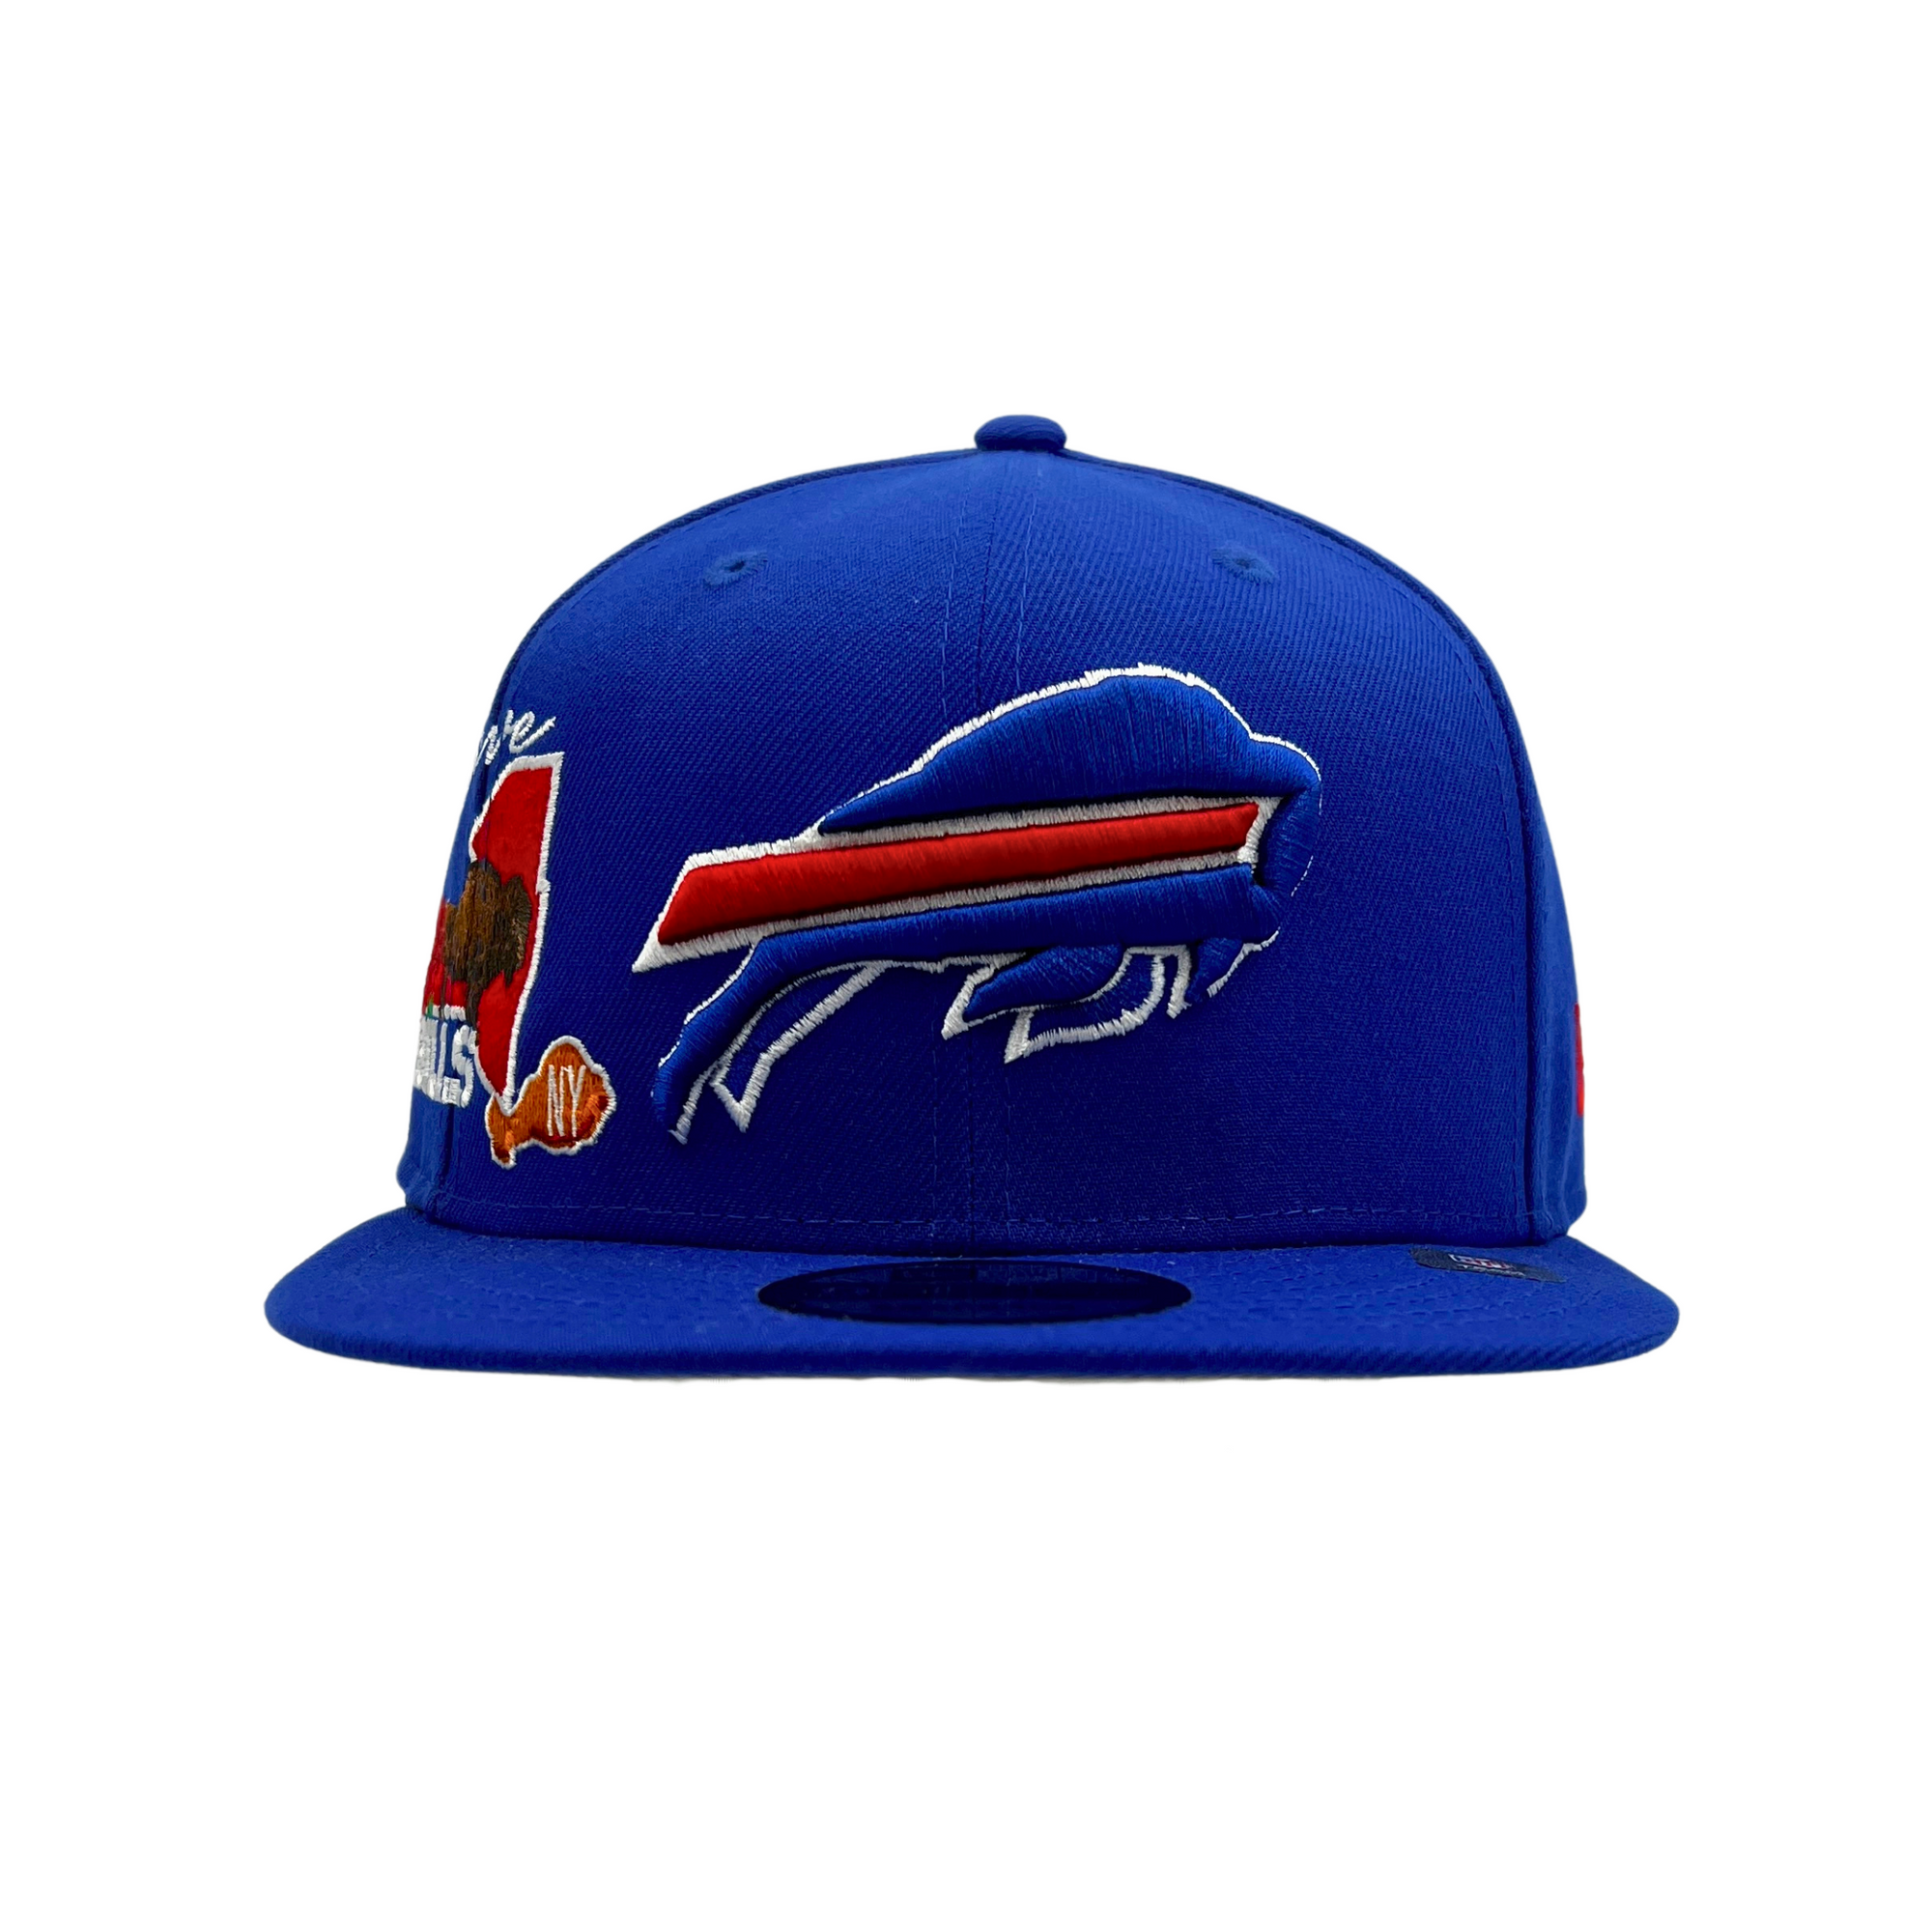 New Era Bills 9FIFTY With State, Bison, & Chicken Wing Icon Royal Hat